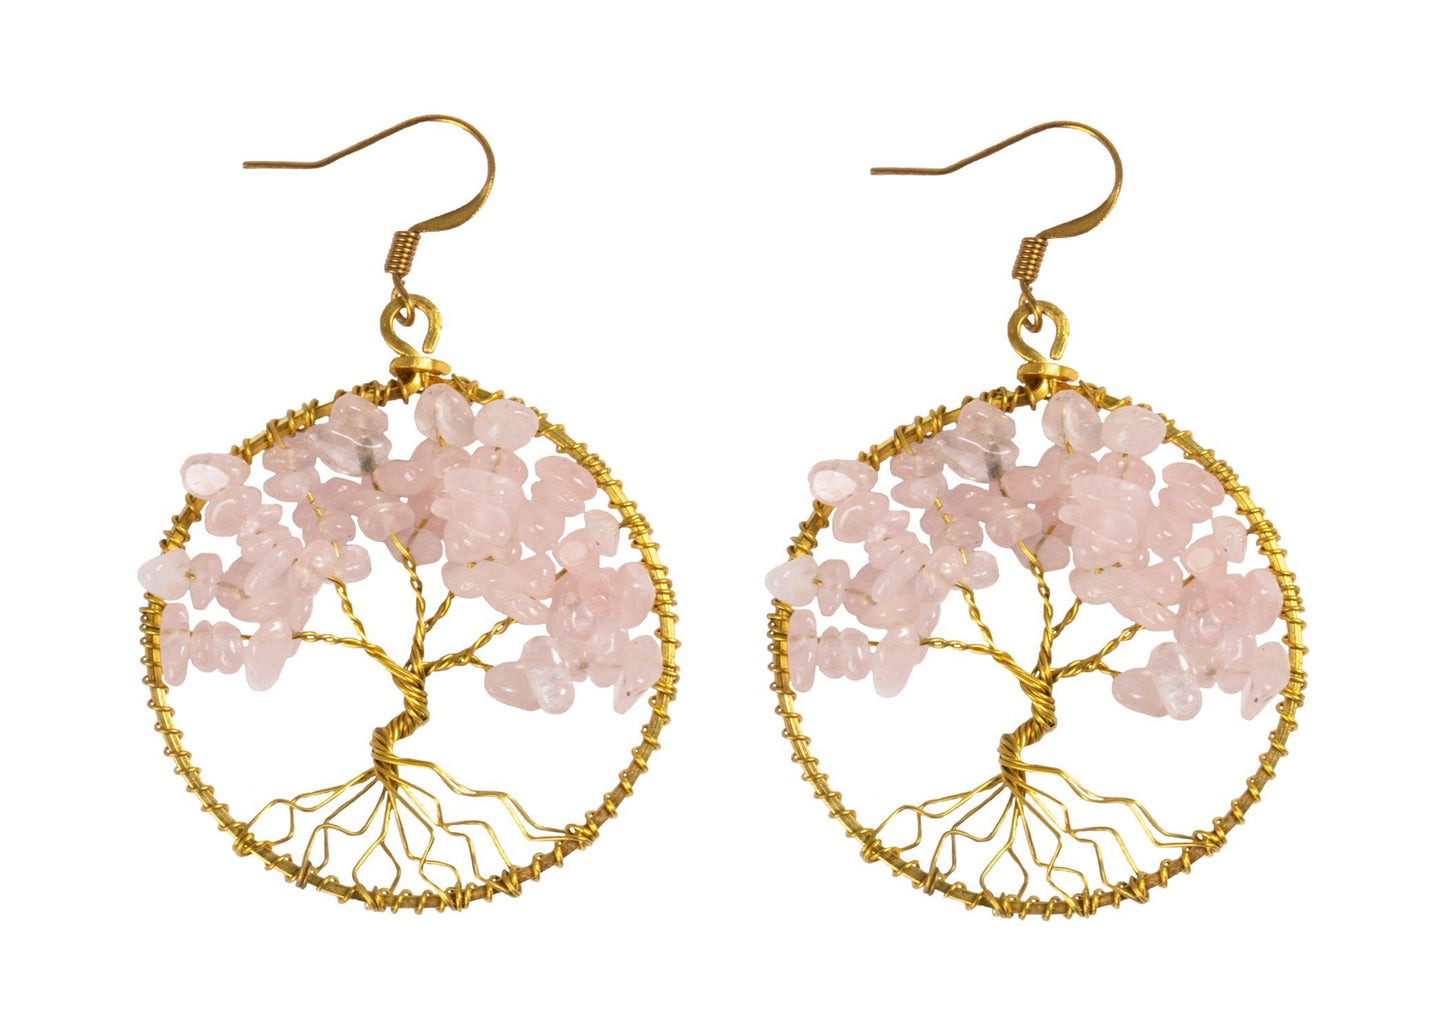 Handmade Earring Tree of Life Brass Circle Shape with Bead, Crystal and Stone - CCCollections